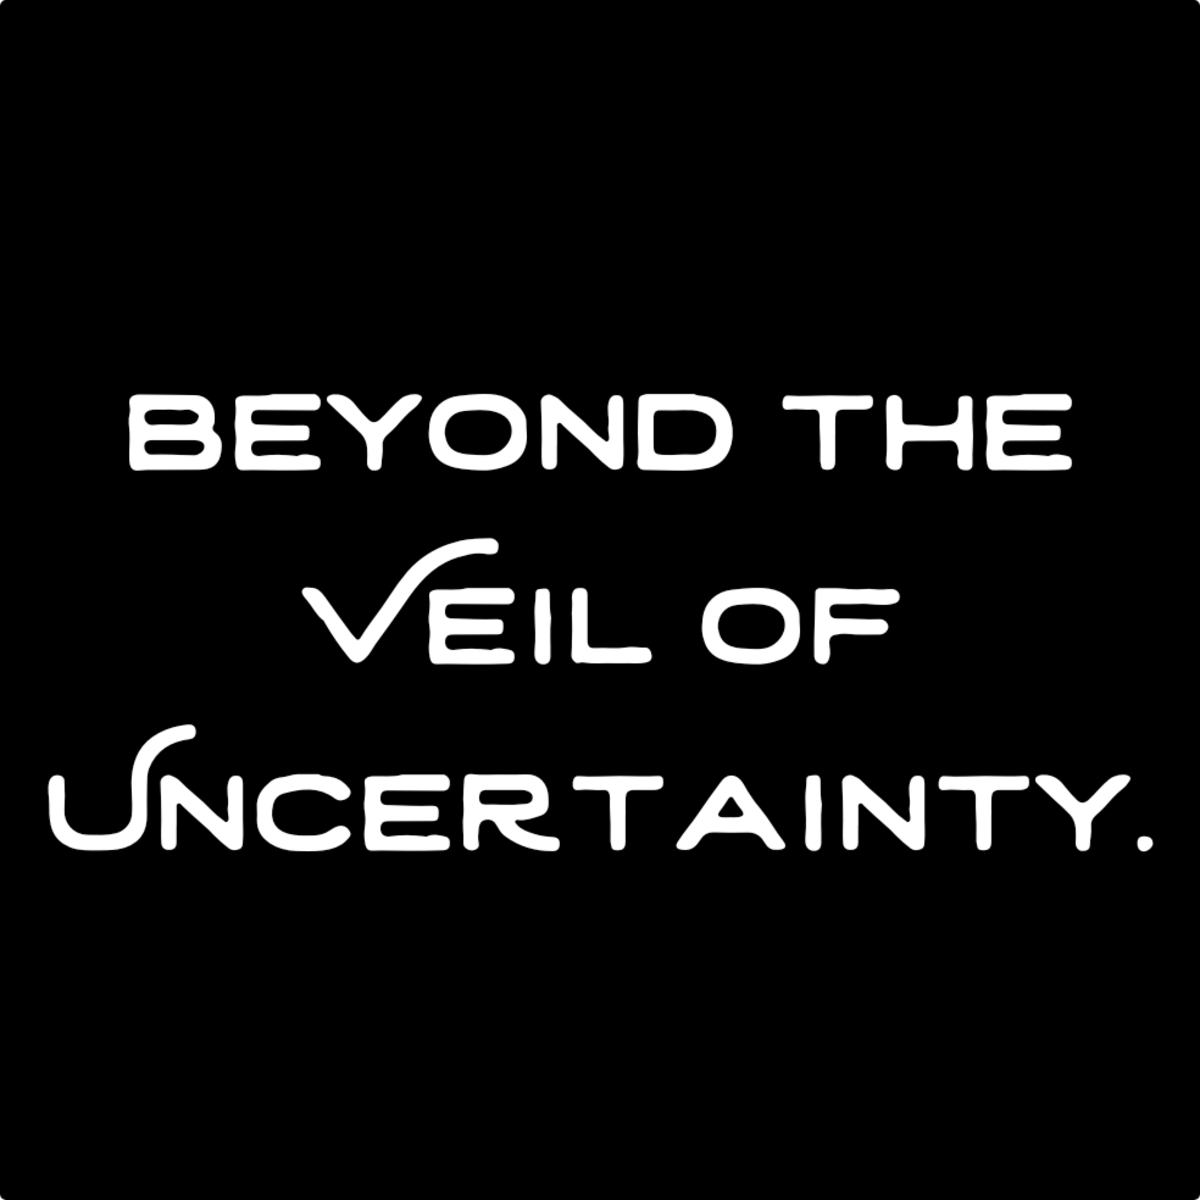 Beyond the Veil of Uncertainty.